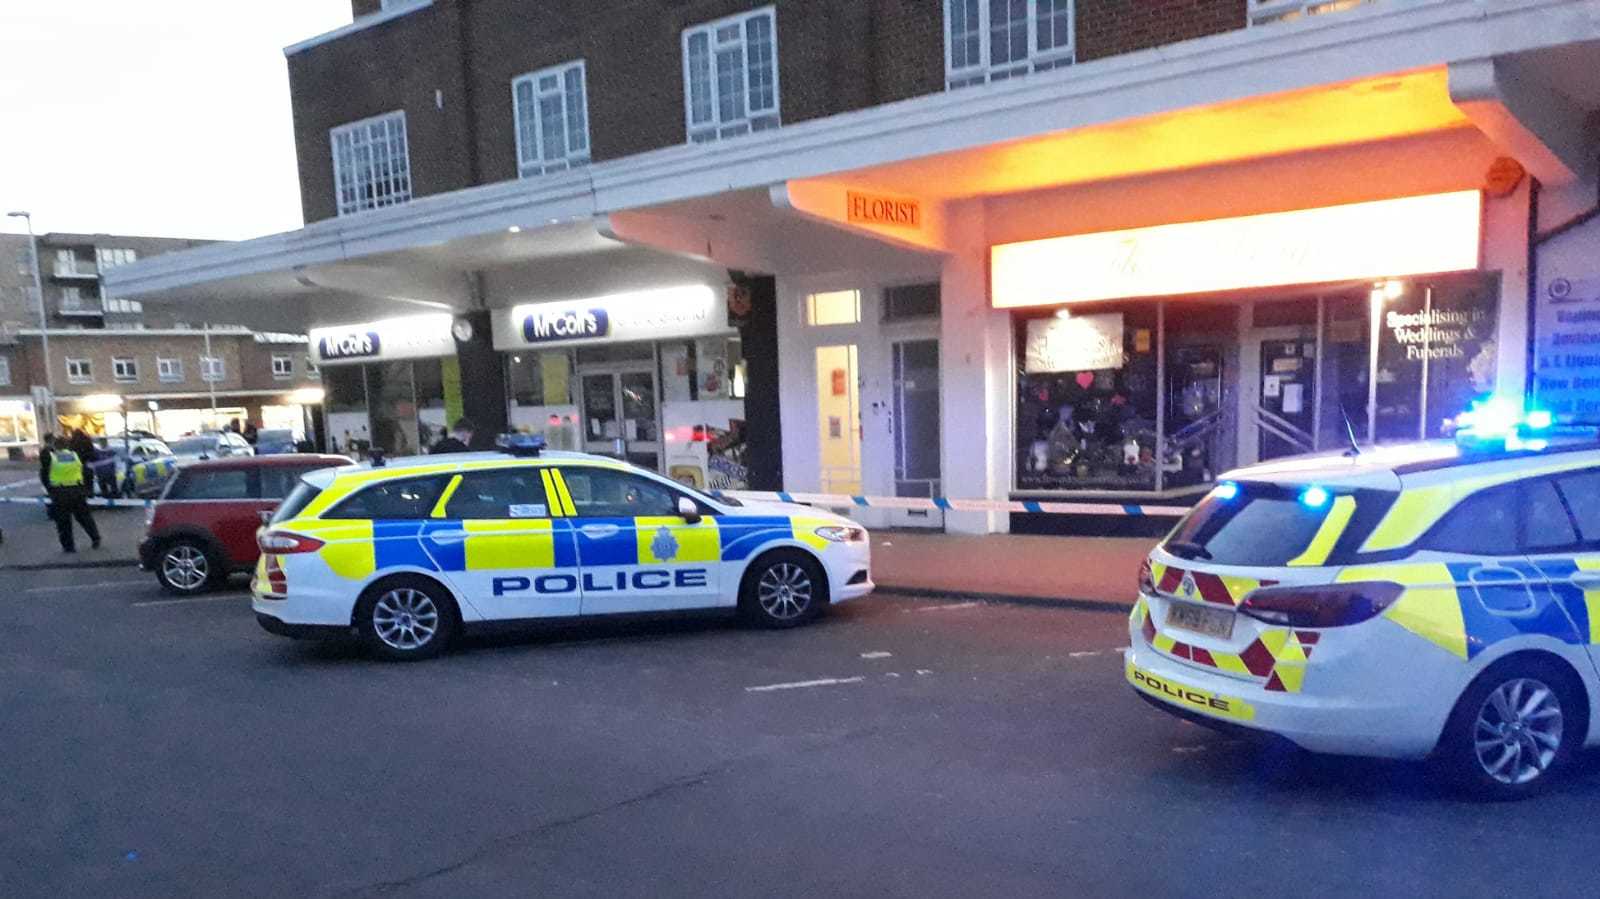 Sussex Police have been called to an incident in The Strand, Worthing, this evening